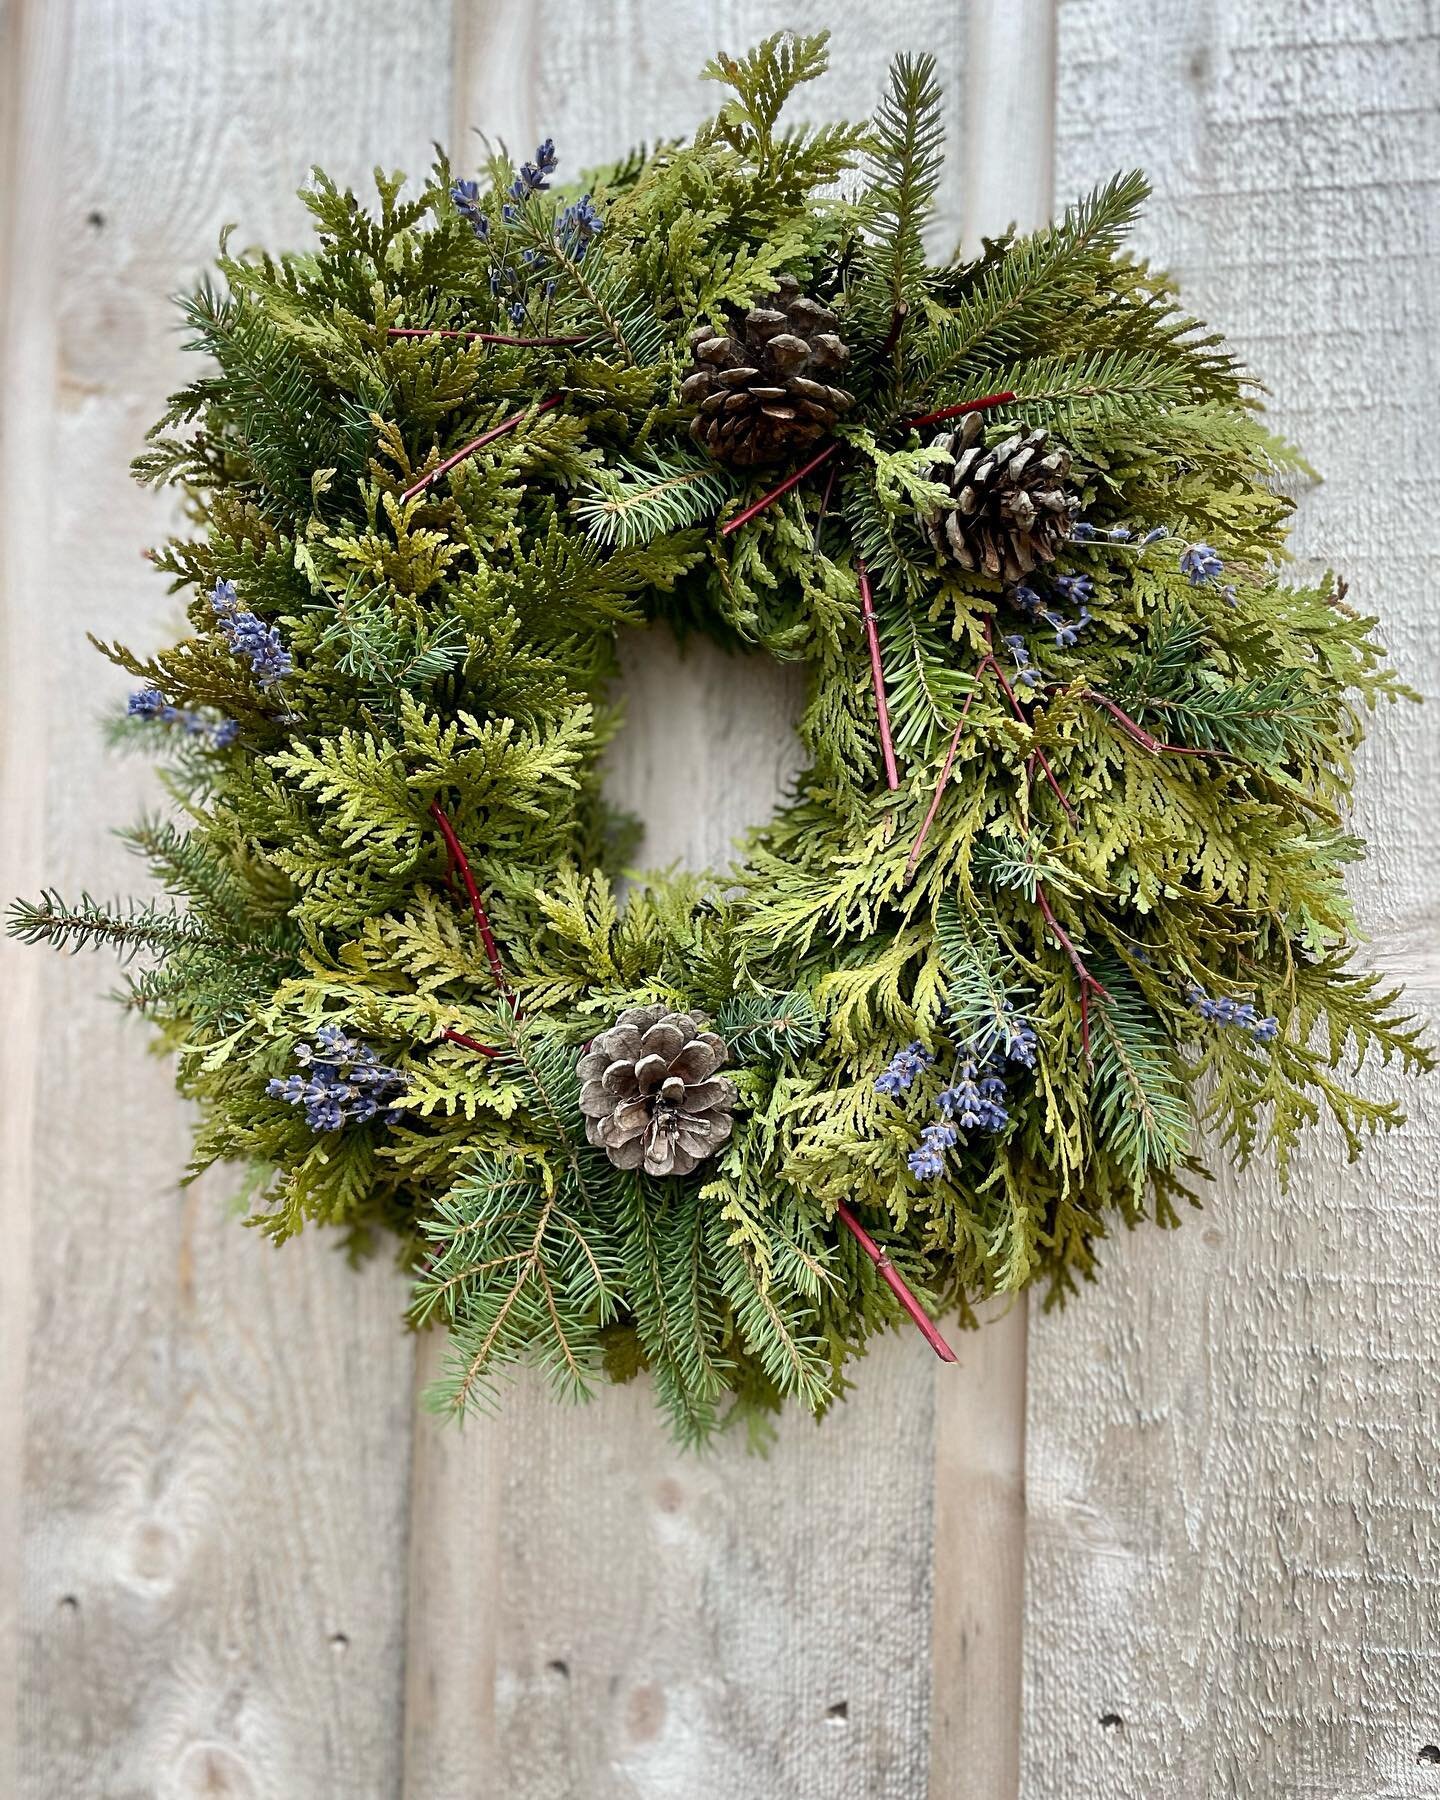 Hey Manitoulin! We&rsquo;ve got something special for you 🥰 Introducing our handmade, all-natural holiday wreaths, made to order with love from the Farmstead.

Infused with the gentle scent of dried lavender or without &mdash; we&rsquo;ve got you co